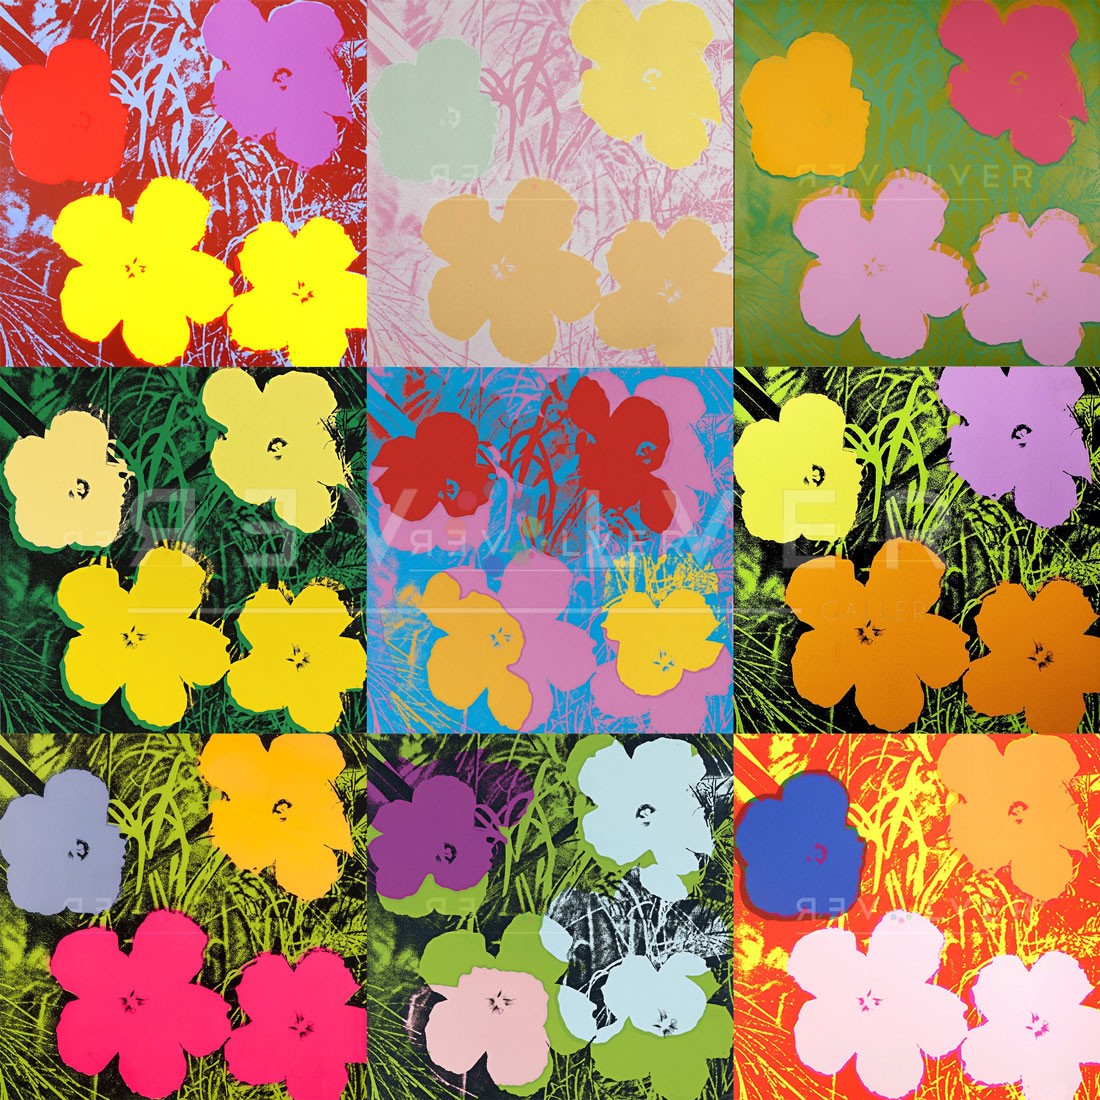 Andy Warhol Flowers complete portfolio image showing nine prints with Revolver Gallery watermark.